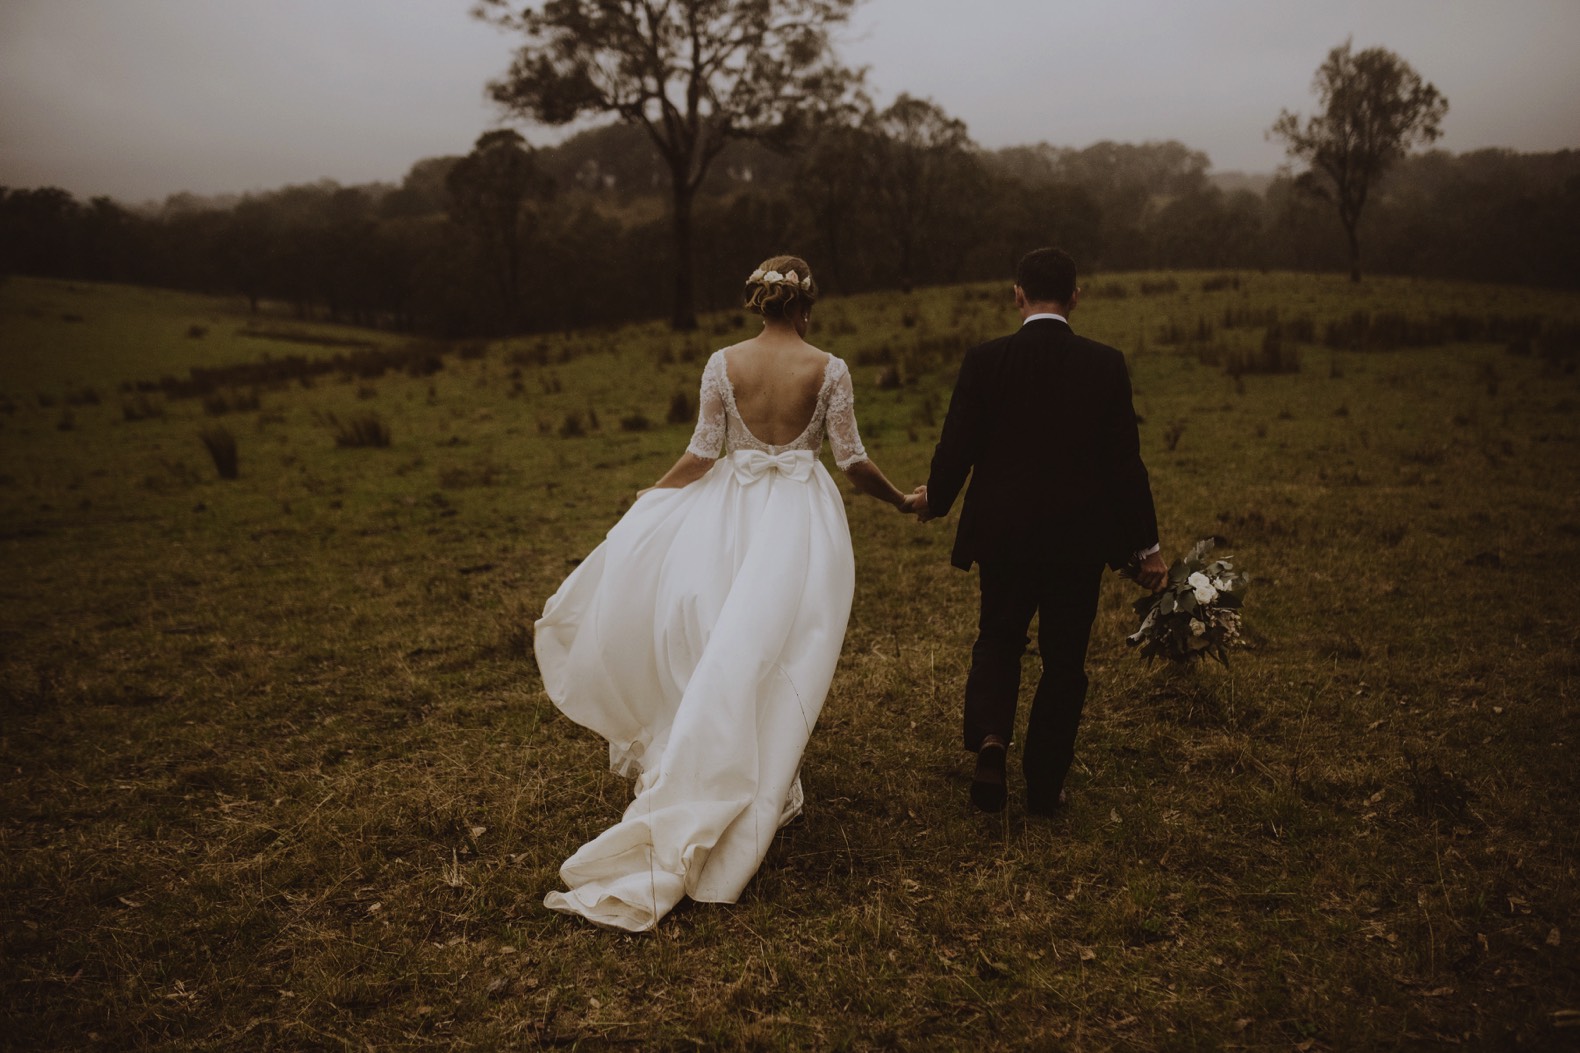 photo of bride and groom walking away hand in hand in a field in the rain